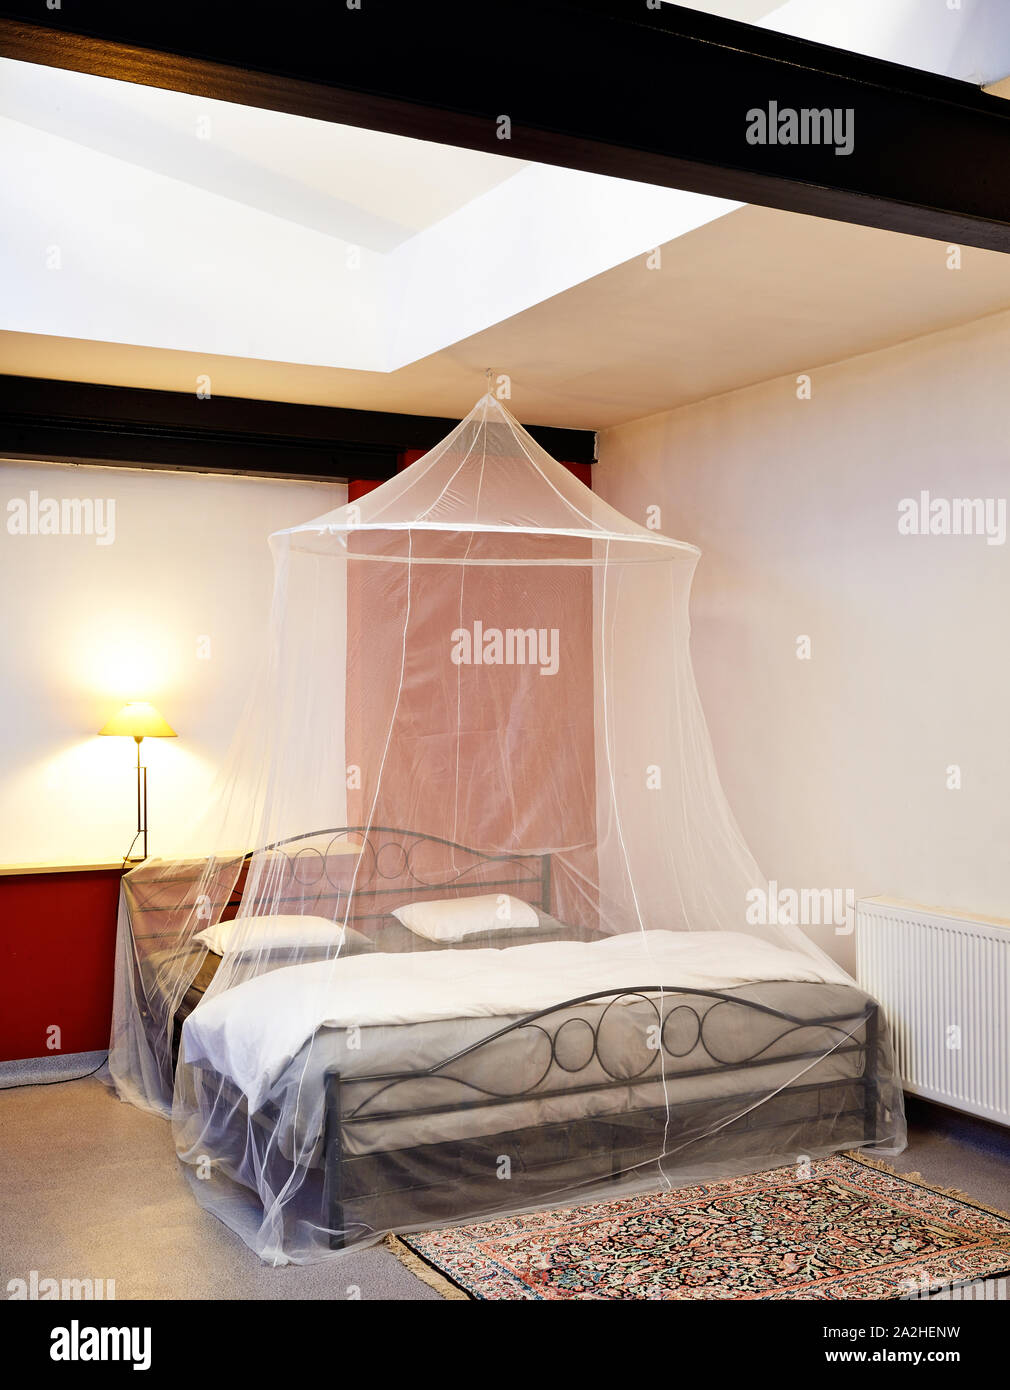 Cosi vintage bed with mosquito Net in a restored loft Stock Photo